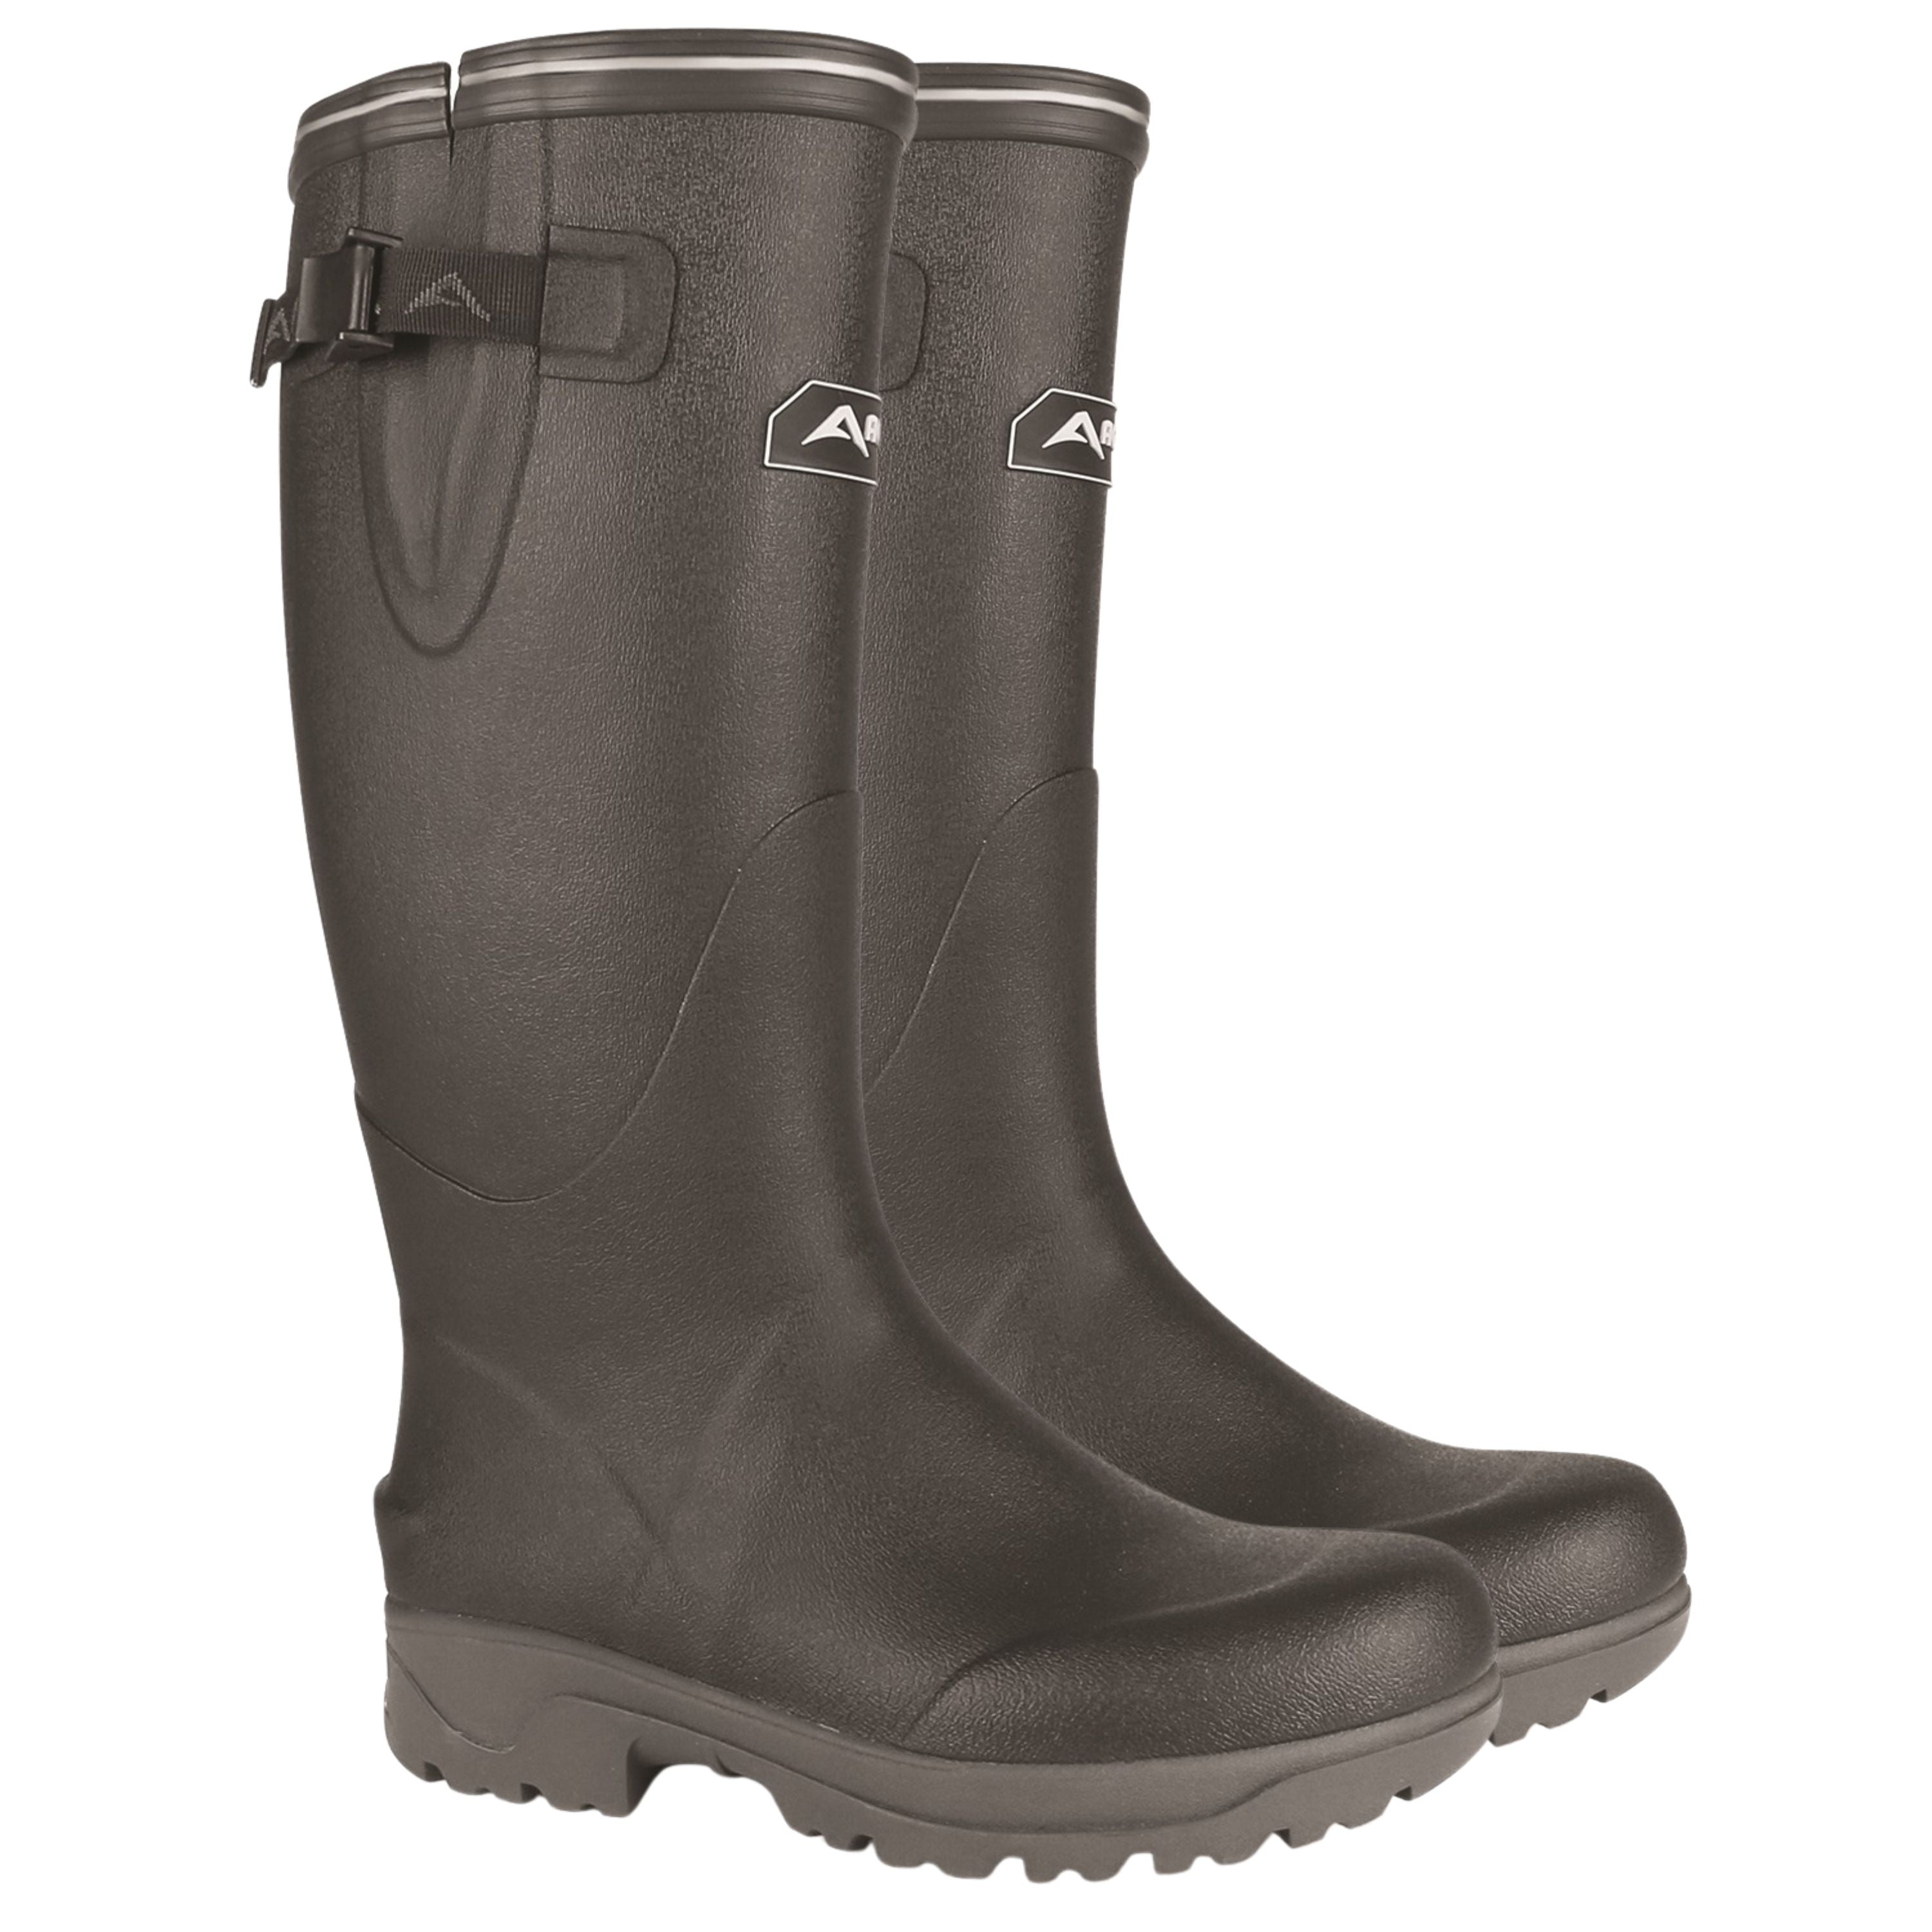 "Tackle" boots - Women's